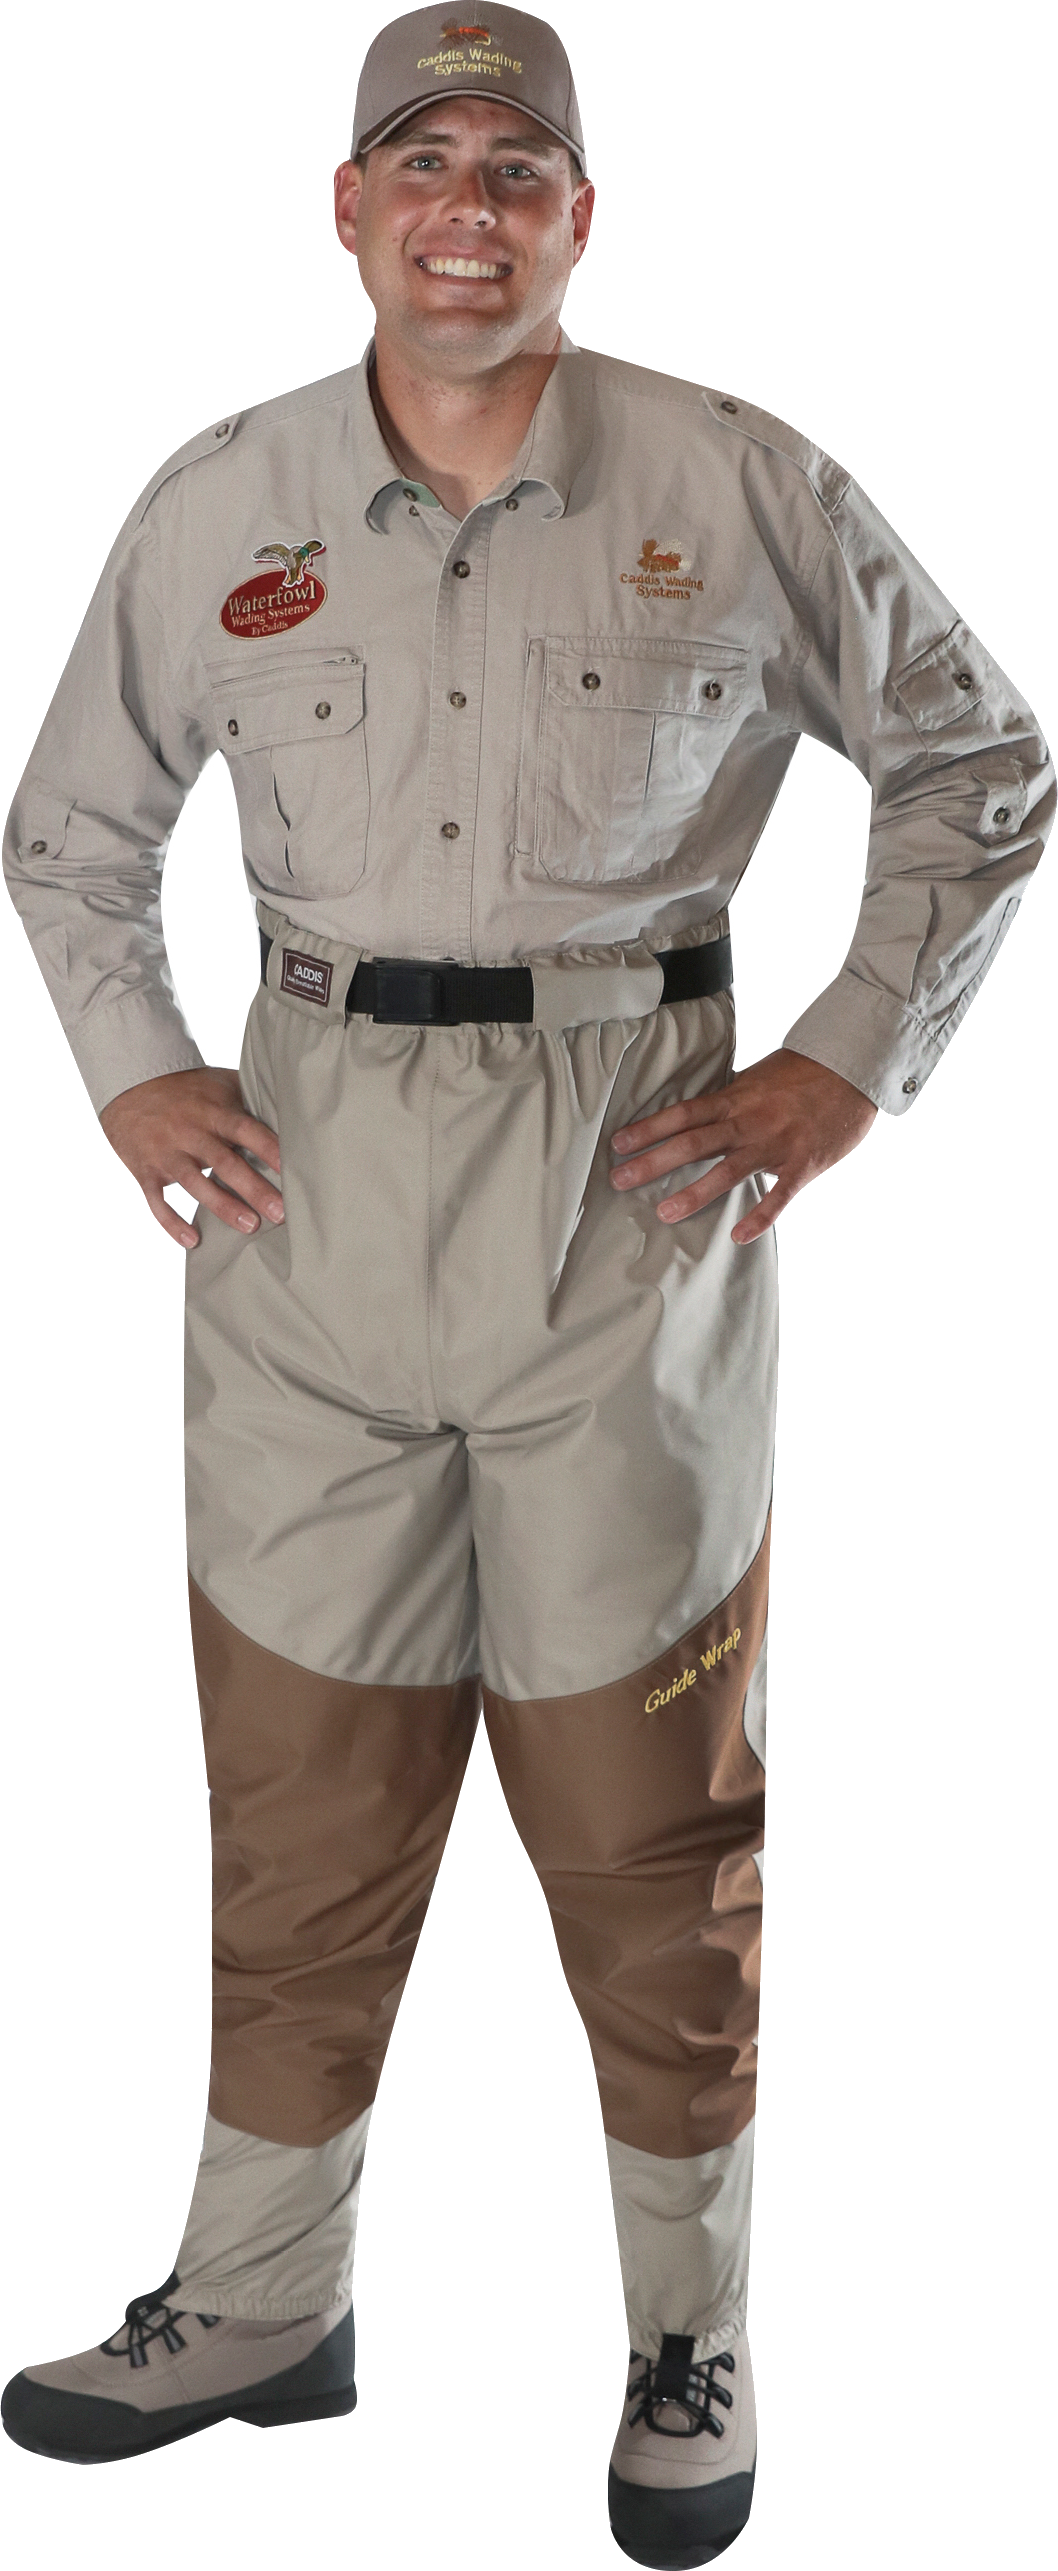 Caddis Deluxe Waist High Breathable Waders for Men